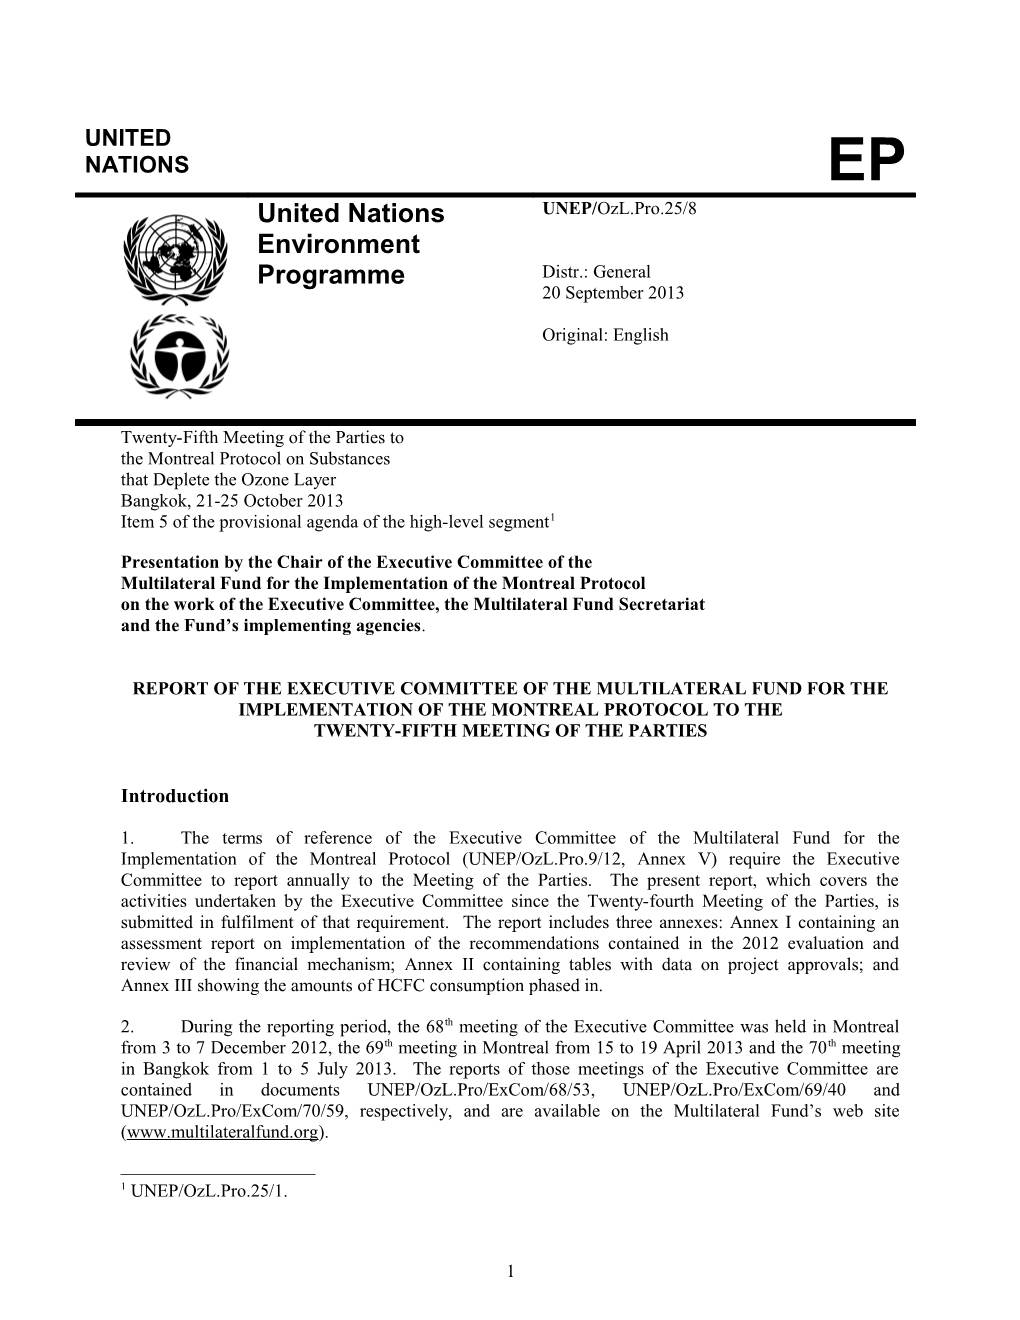 Report of the Executive Committee of the Multilateral Fund for the Implementation of The